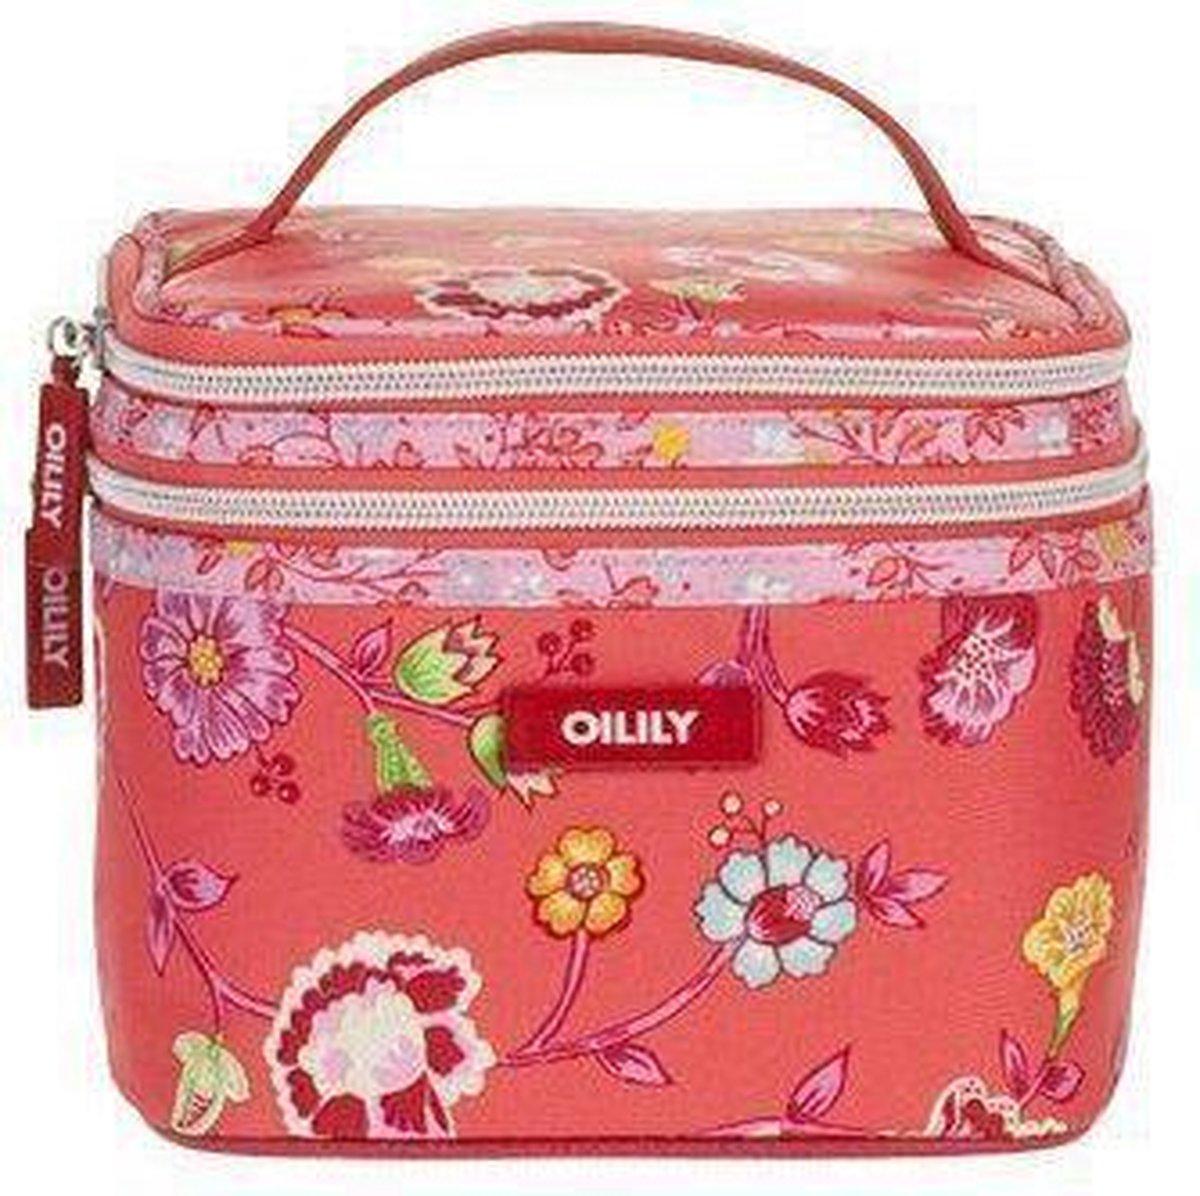 Oilily Classic Ivy Square Cosmeticbag Tangerine | bol